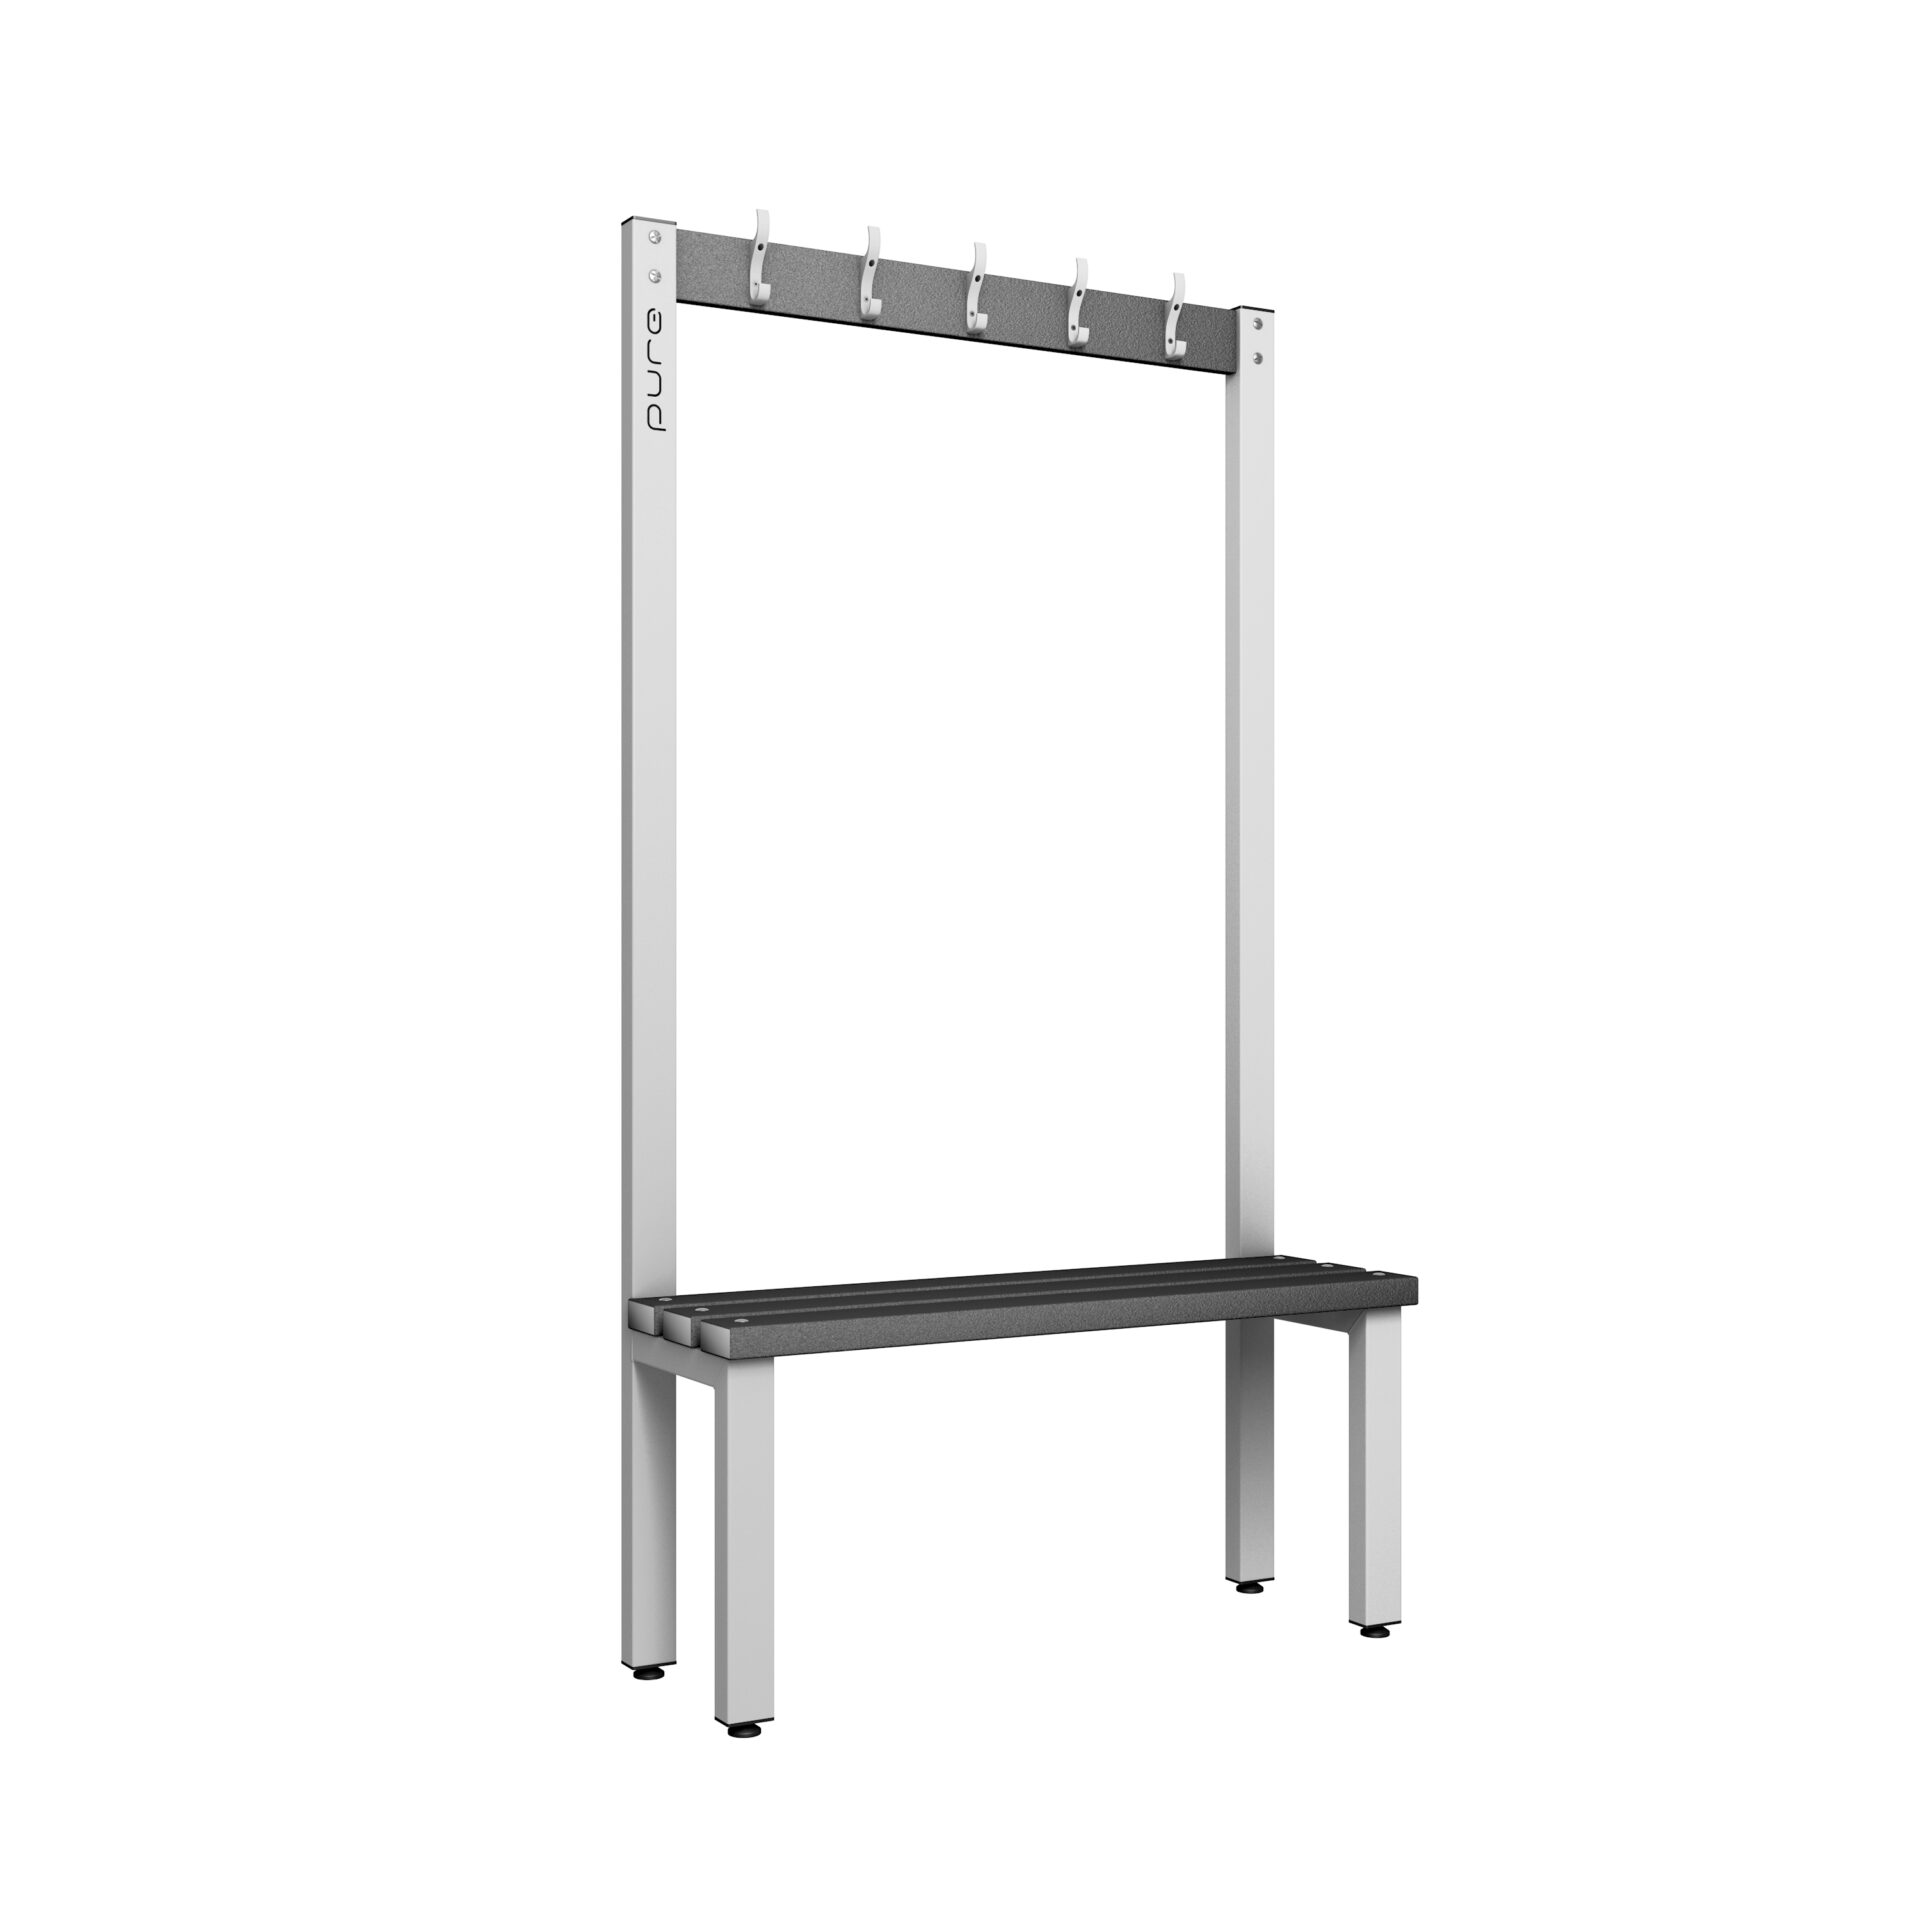 Pure Carbon Zero Single Sided 1000mm 5 Hook Bench - Pearl Silver / Black Polymer